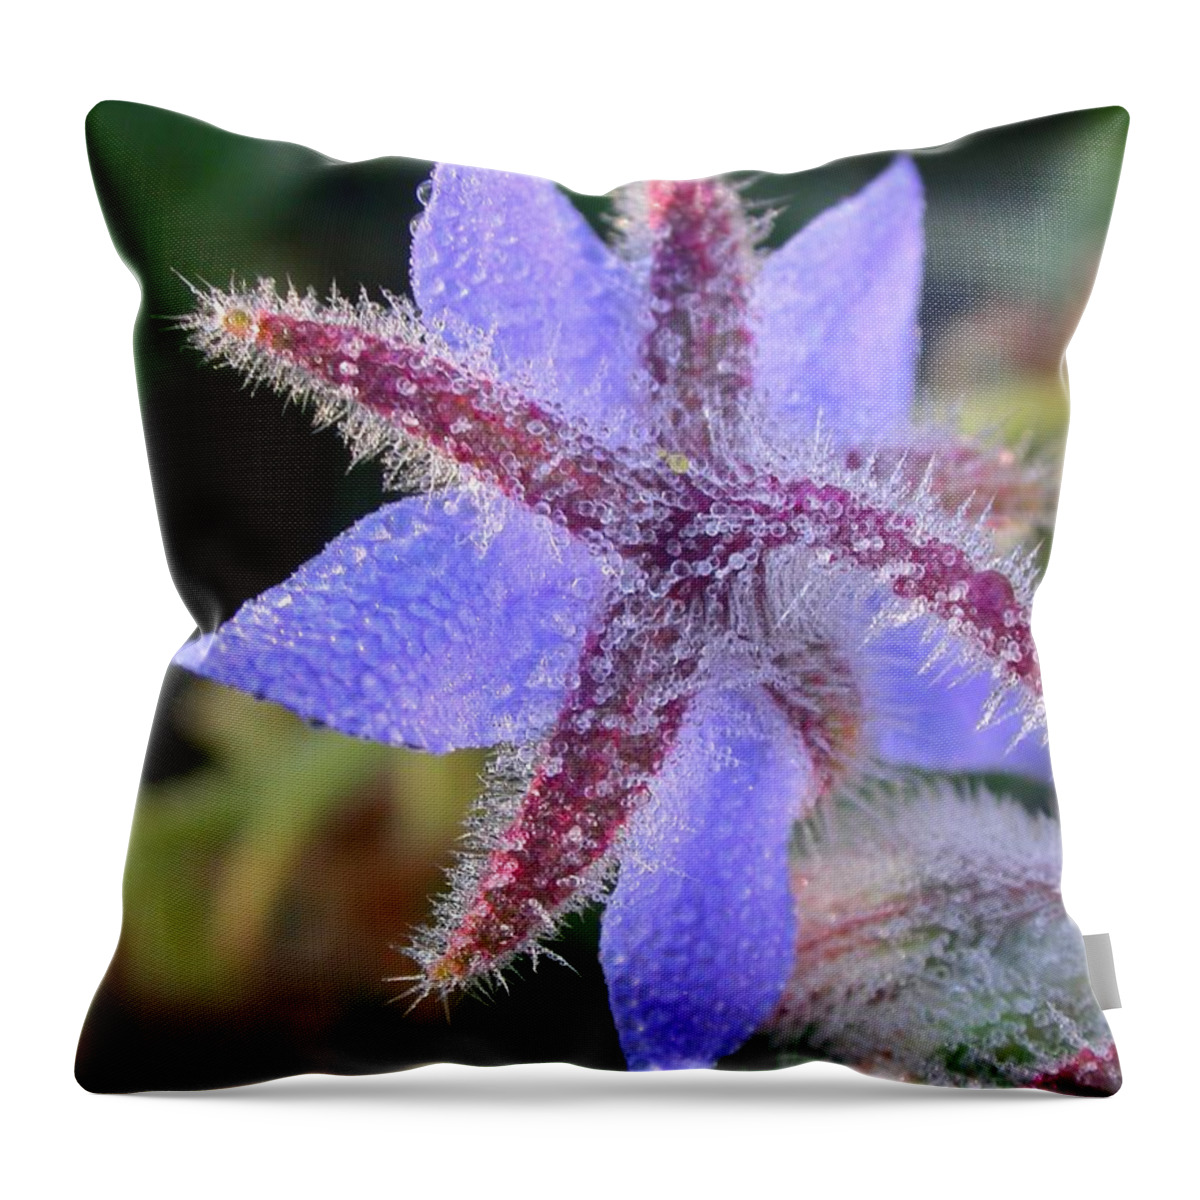 Borage Photograph Throw Pillow featuring the photograph Borage Droplets by Cynthia Wallentine